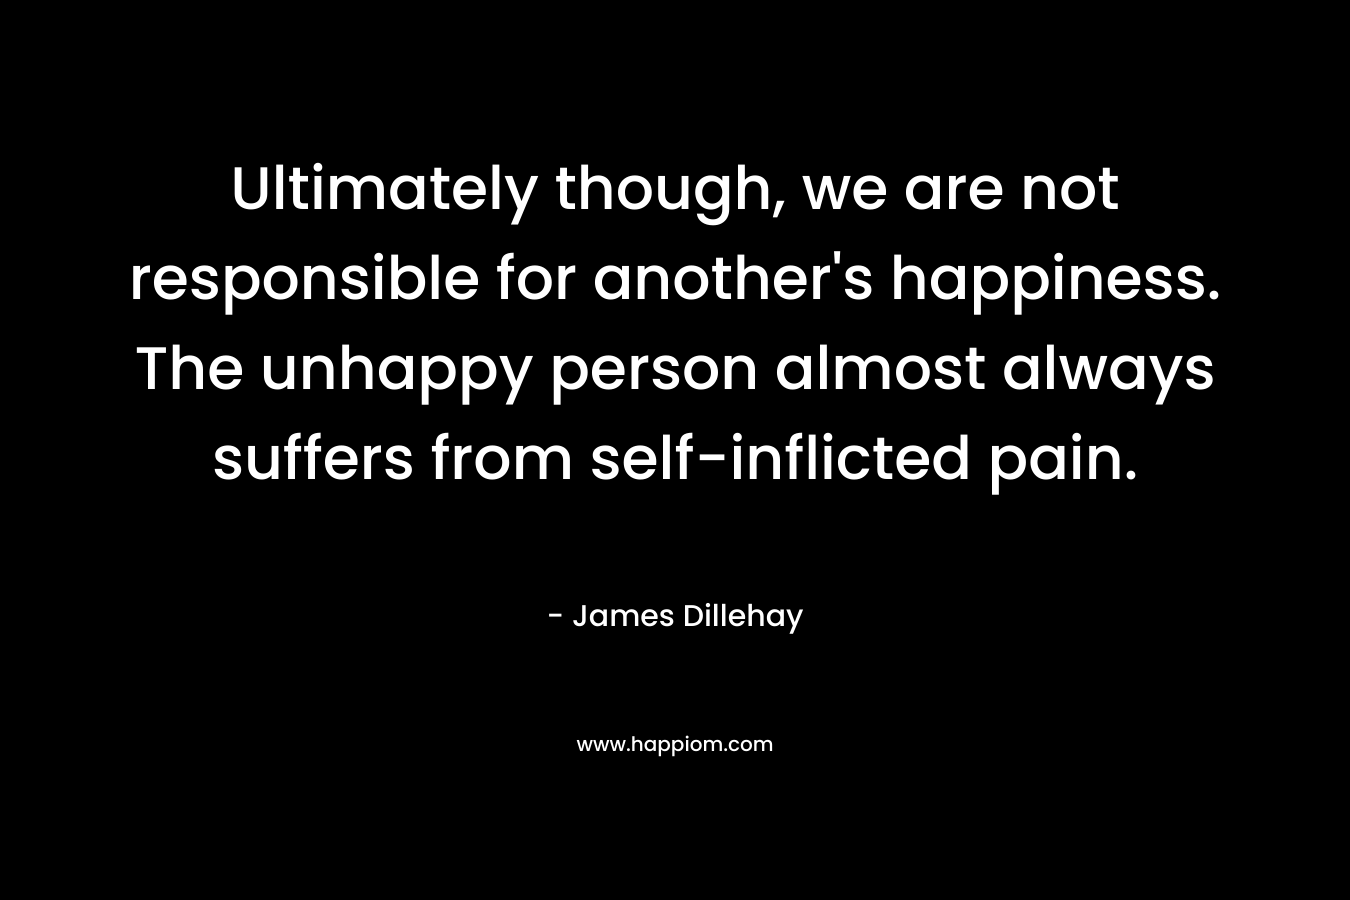 Ultimately though, we are not responsible for another's happiness. The unhappy person almost always suffers from self-inflicted pain.